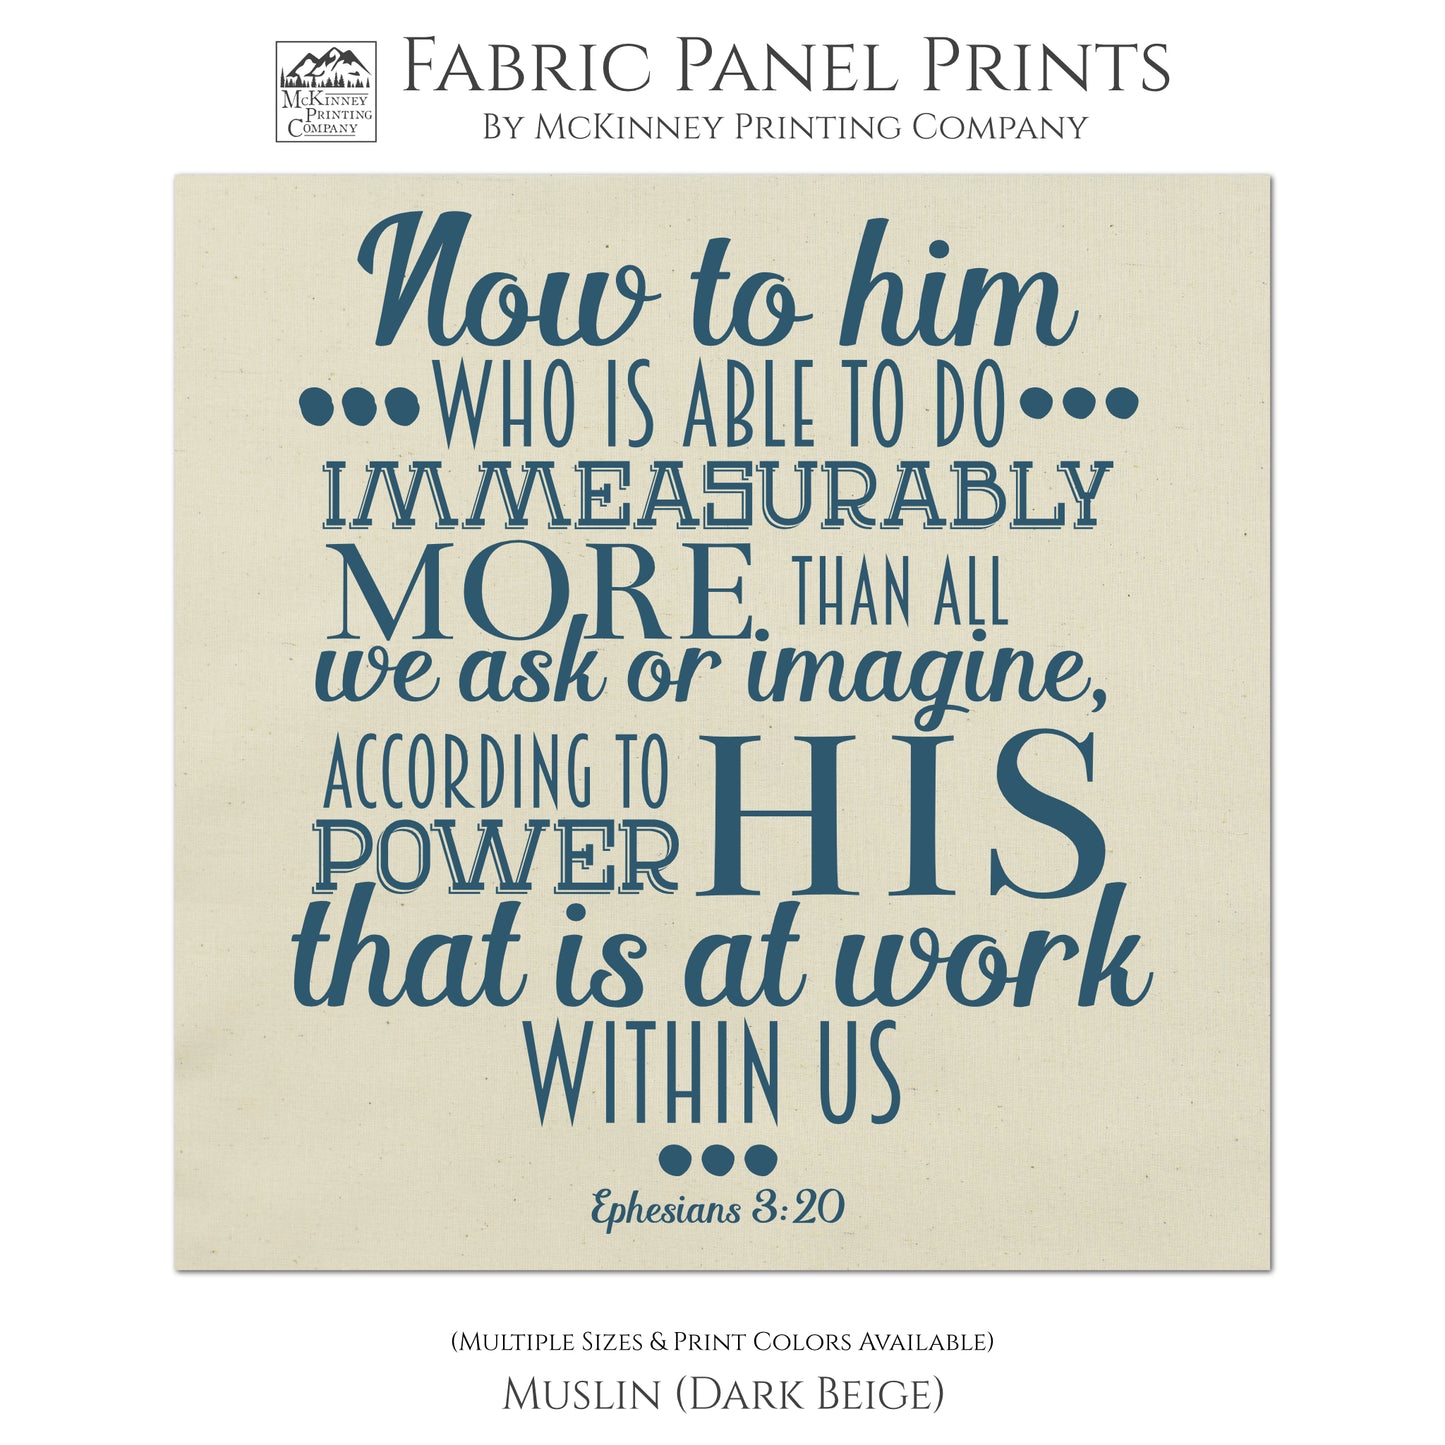 Now to him who is able to do immeasurably more than all we ask or imagine according to His power that is at work within us. - Ephesians 3 20 - Religious Fabric, Scripture Fabric, Quilting, Quilt Block, Sewing, Pillow, Wall Art - Muslin